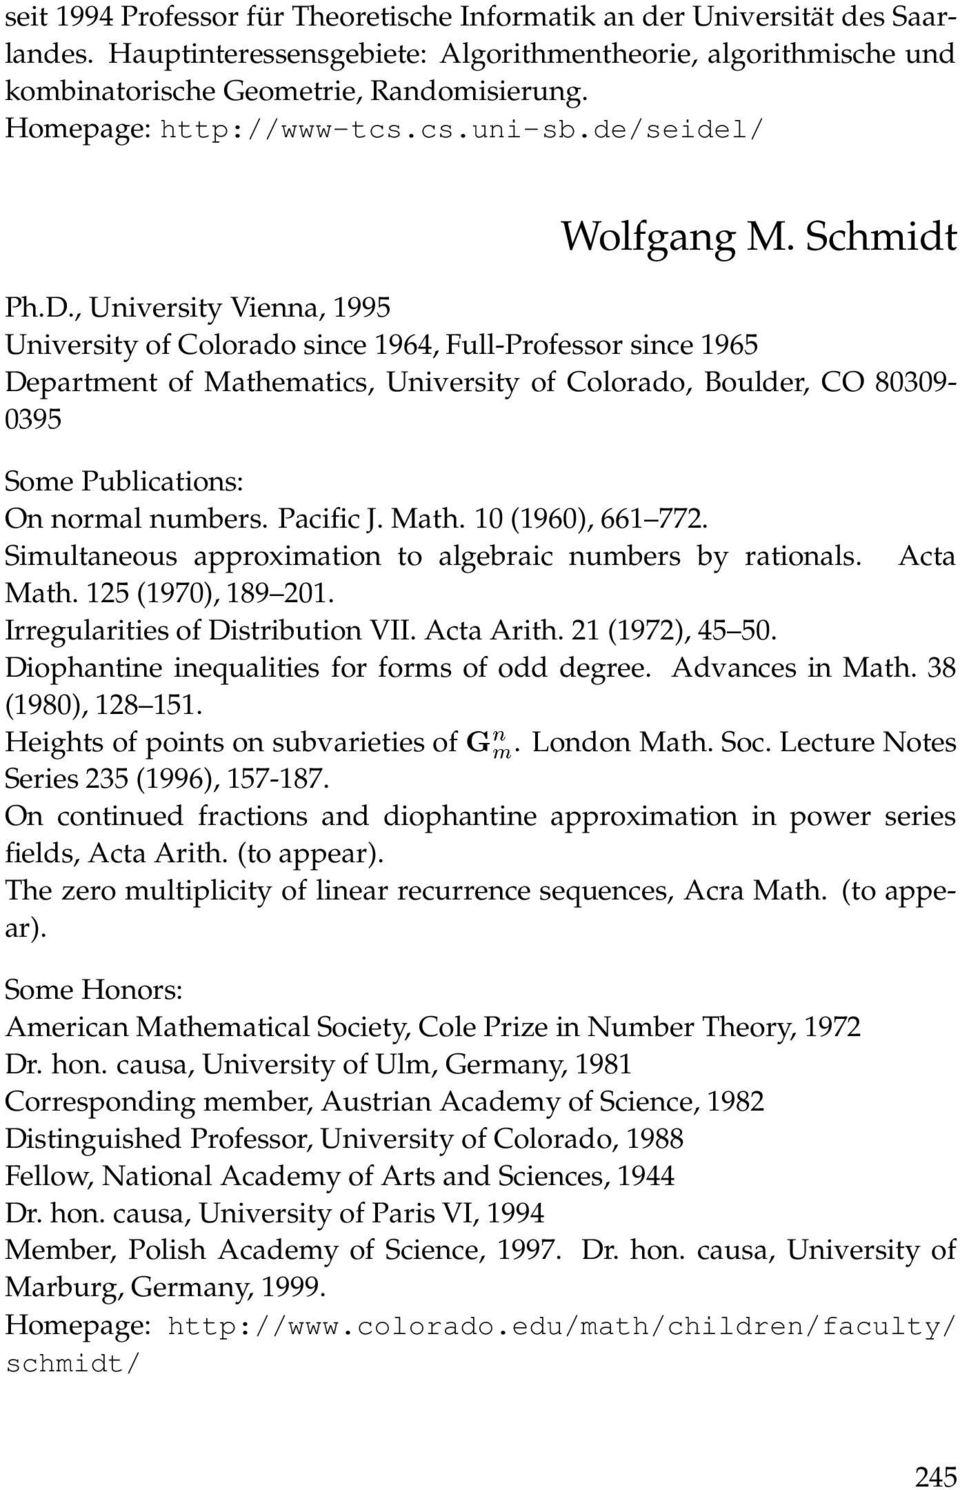 , University Vienna, 1995 University of Colorado since 1964, Full-Professor since 1965 Department of Mathematics, University of Colorado, Boulder, CO 80309-0395 Some Publications: On normal numbers.